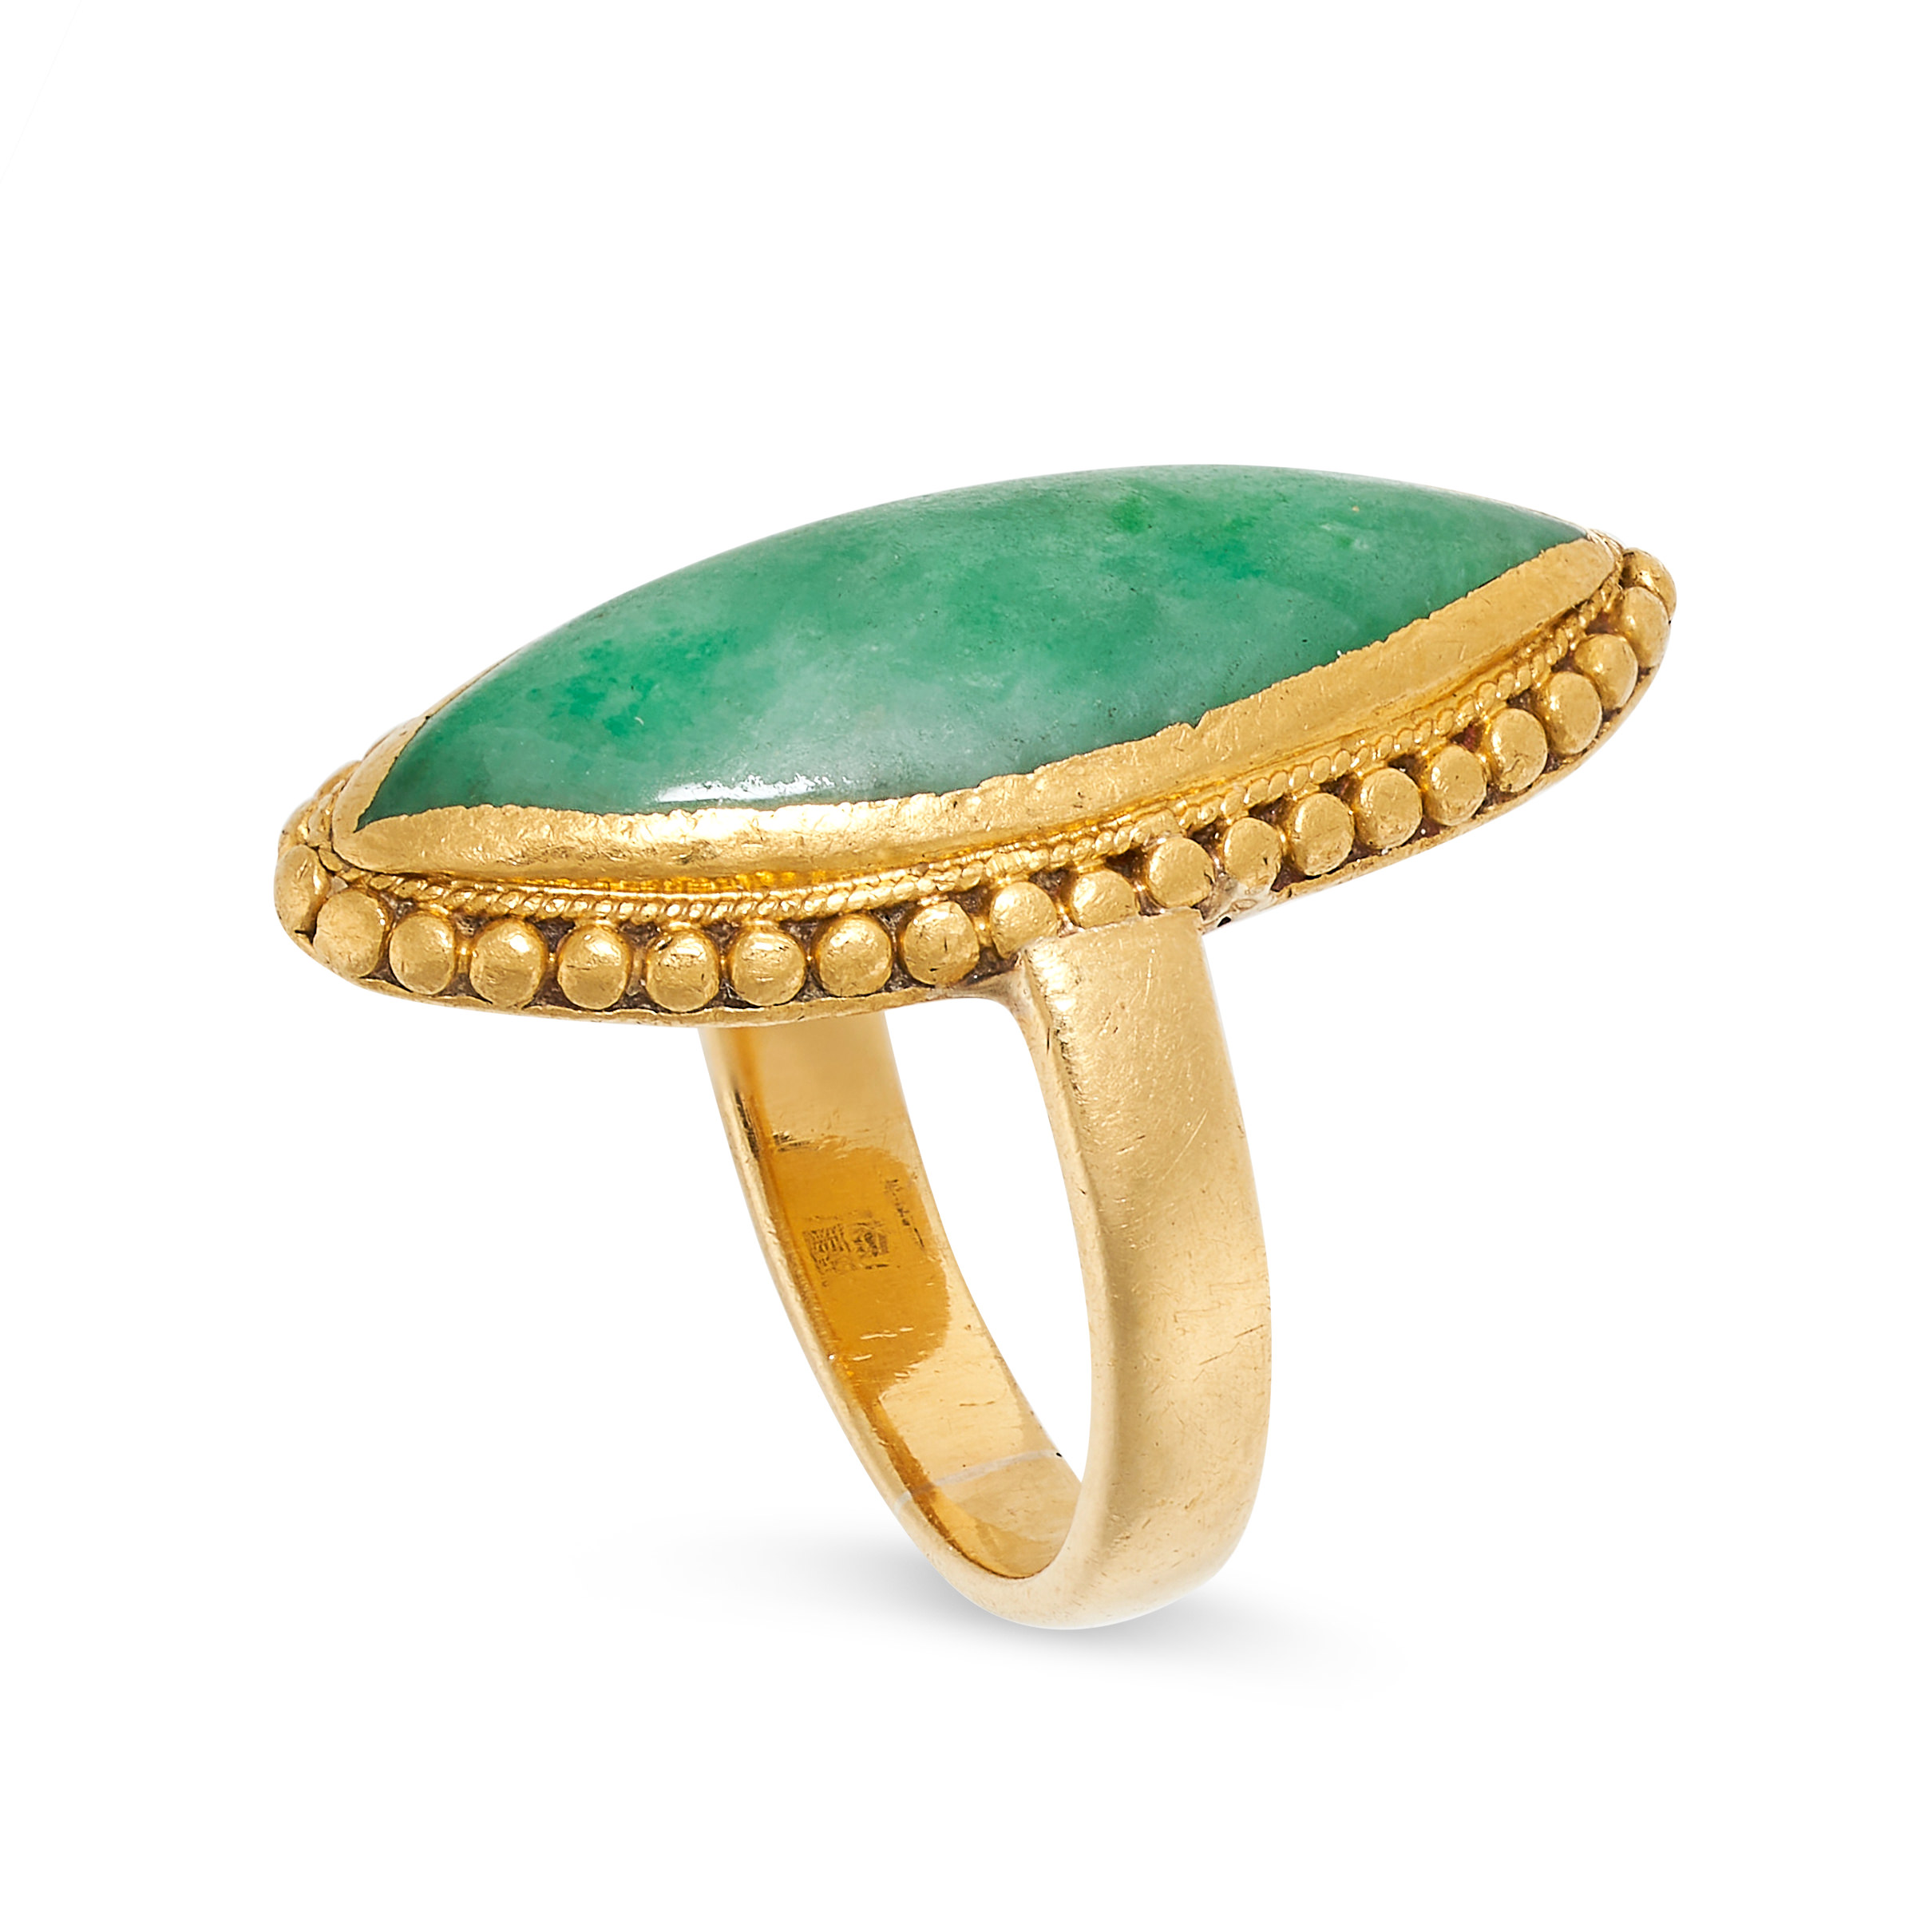 NO RESERVE - A CHINESE JADEITE JADE RING in 24ct yellow gold, set with a marquise shaped cabochon - Image 2 of 3